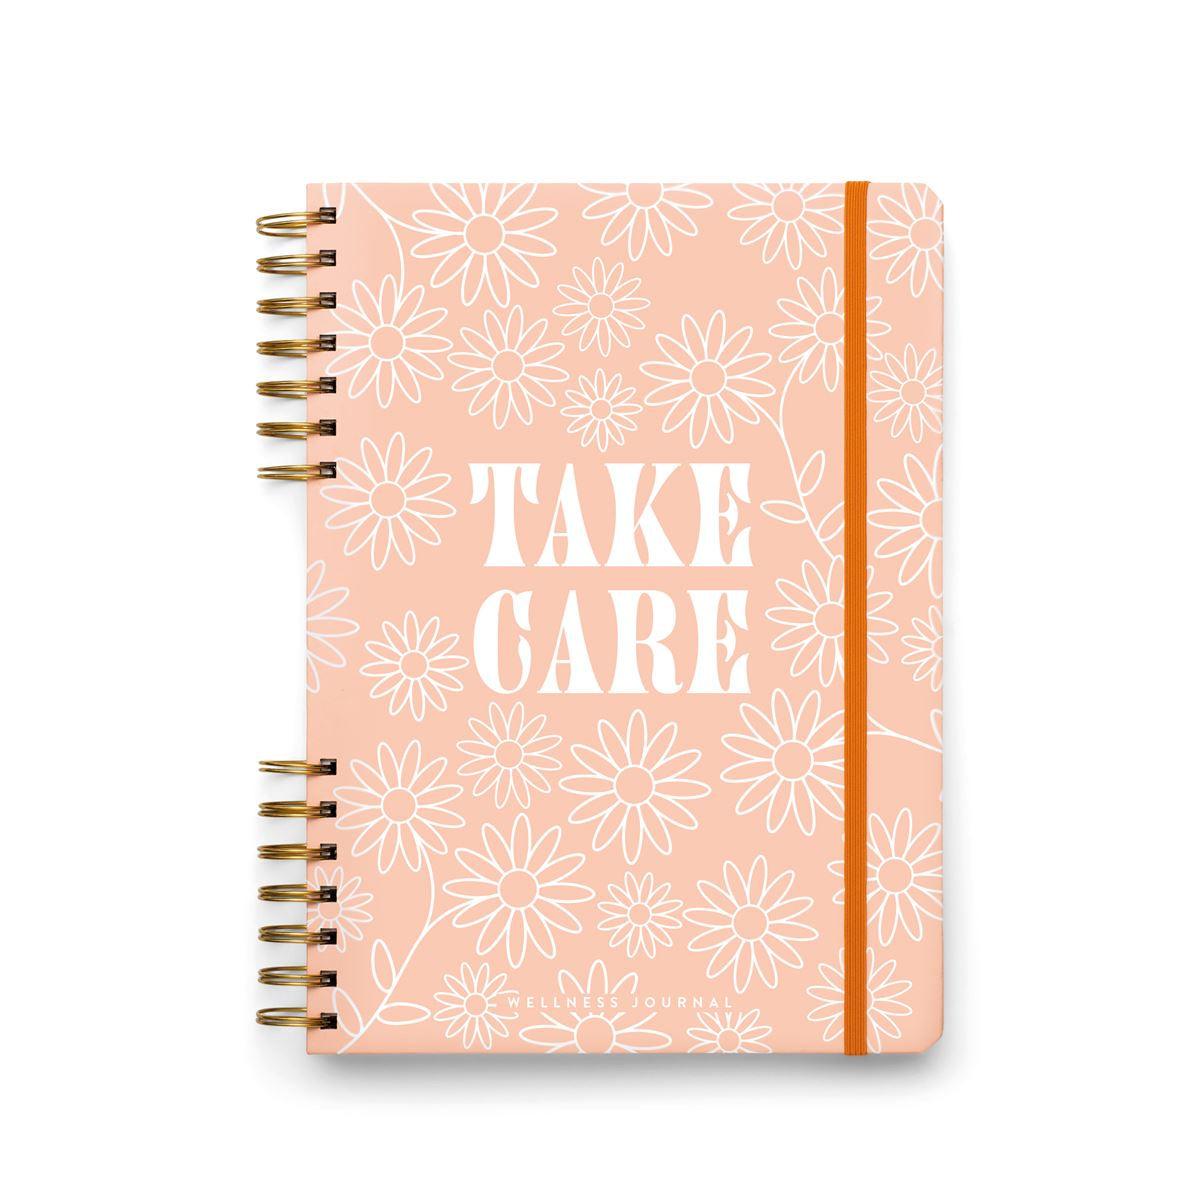 Wellness Journal - Take Care - Handworks Nouveau Paperie